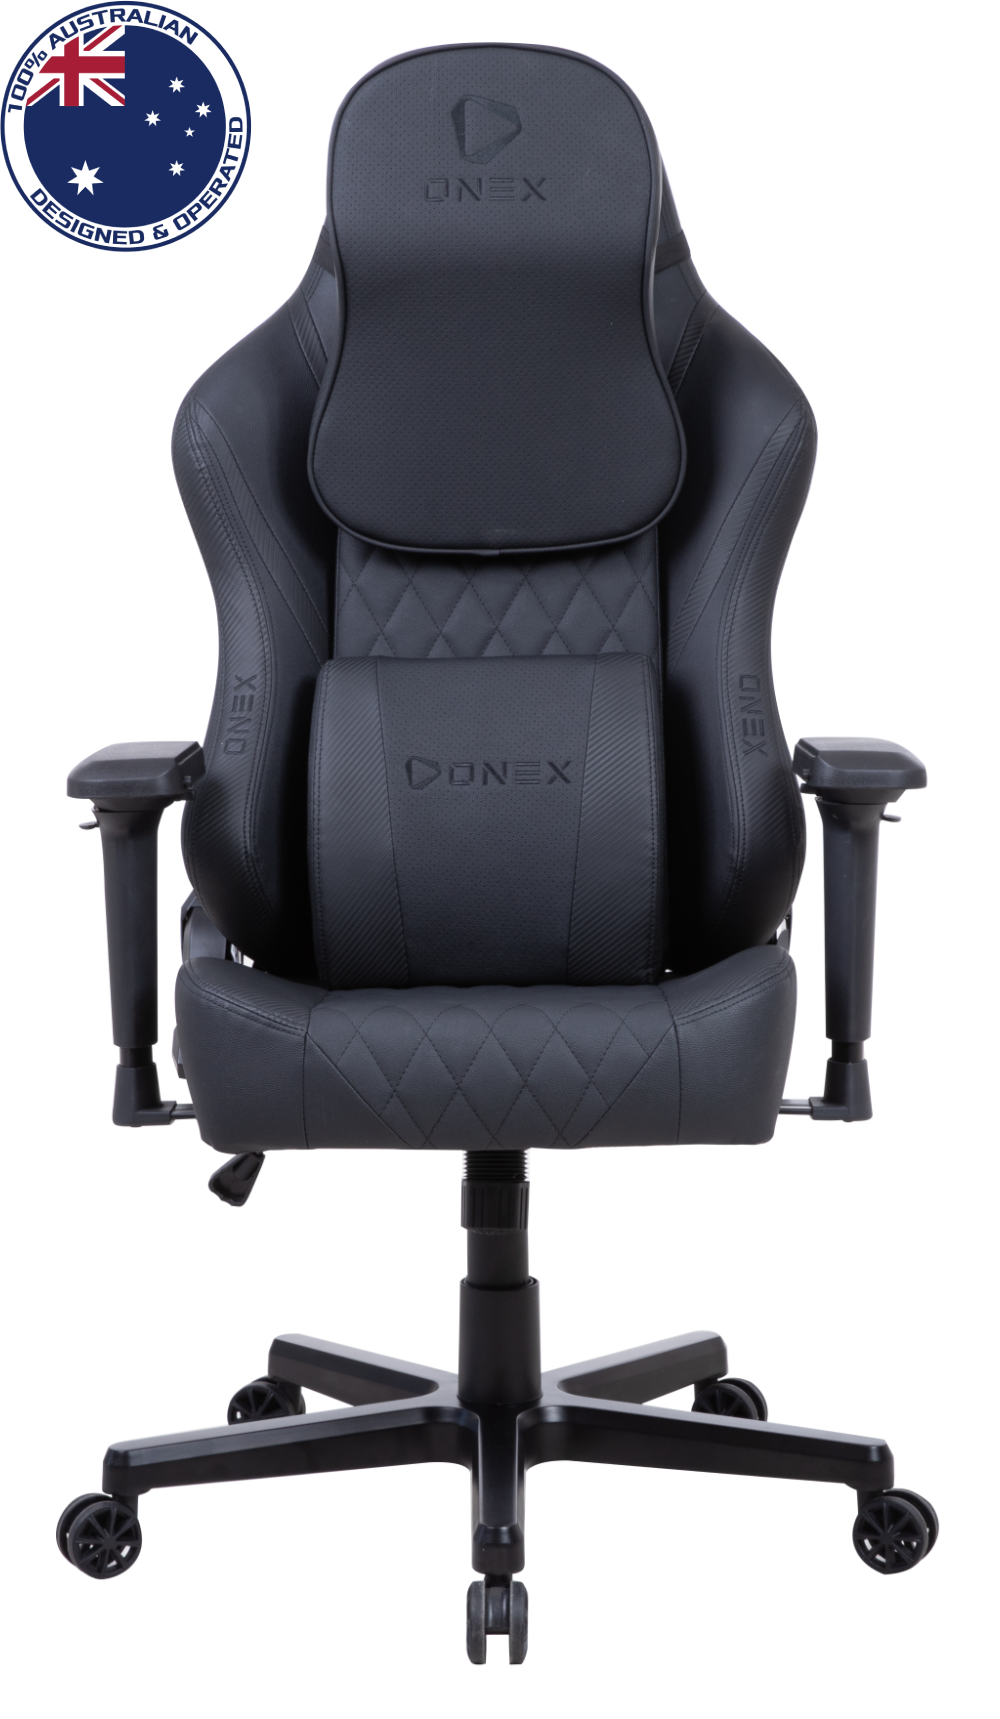  ONEX-FX8 Gaming /Office Chair - Black<BR><fONT COLOR='RED'>In-Store Pickup Not Available - Delivery Only (Freight Charges Apply)  